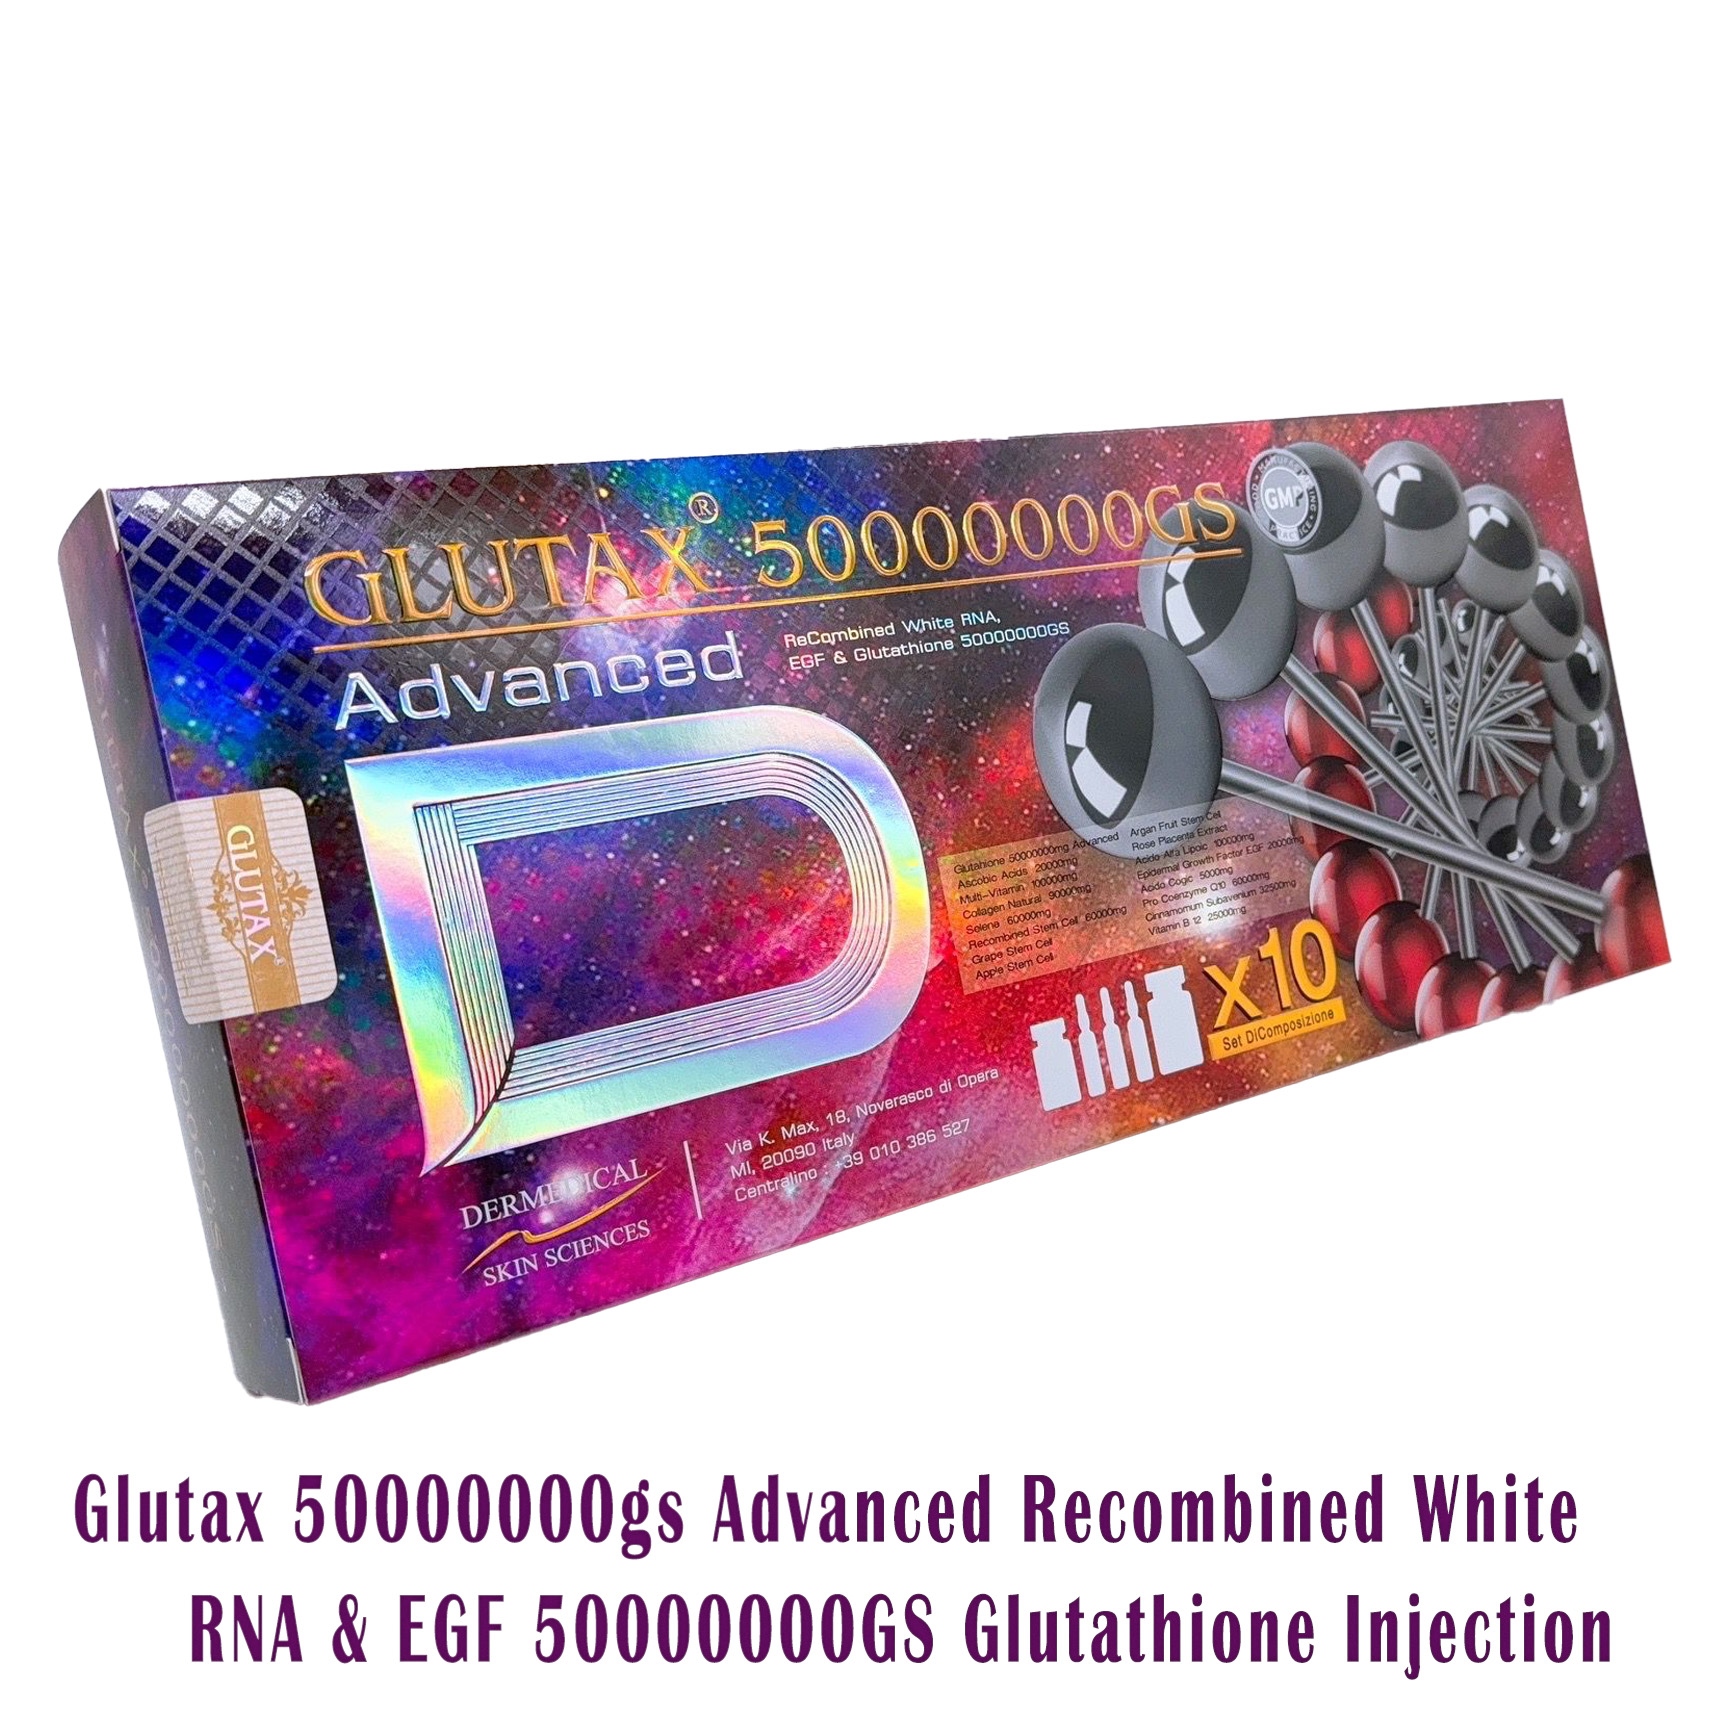 Glutax 50000000GS Advanced Recombined White Glutathione Injection